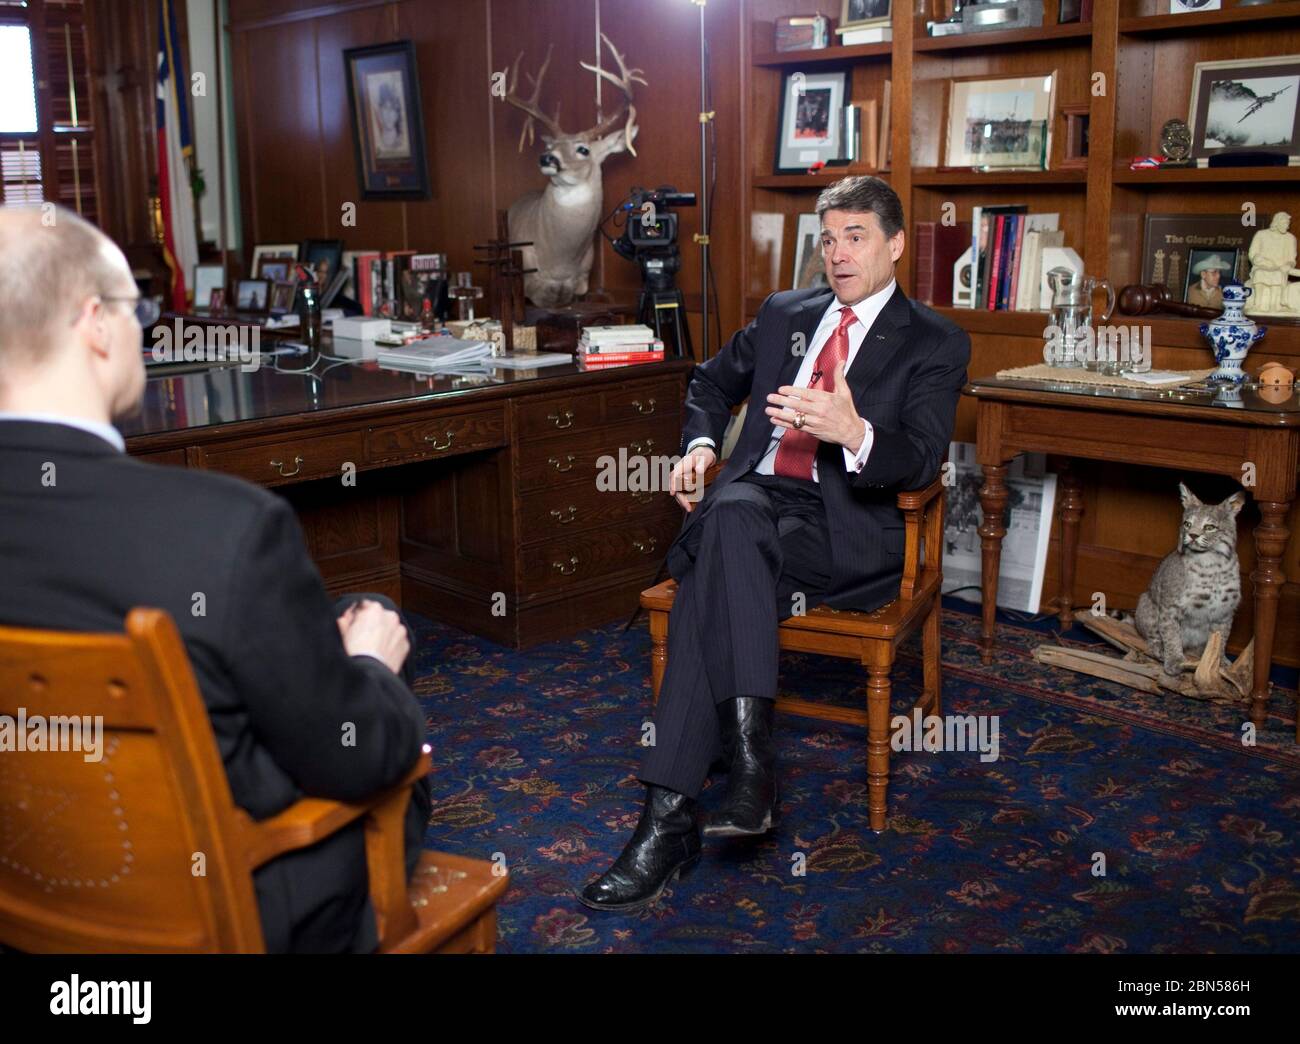 Austin Texas USA, February 21 , 2012: Texas Gov. Rick Perry sits in his Capitol office for his first extended interview since dropping a bid for the Republican presidential nomination. He said he definitely will run for reelection as Texas governor in 2014 and possibly take another stab at the 2016 presidential race. Of his infamous 'oops' gaffe, he said, 'Obviously it embarrasses you...From my perspective, I'd rather it not have happened.'   ©Bob Daemmrich Stock Photo